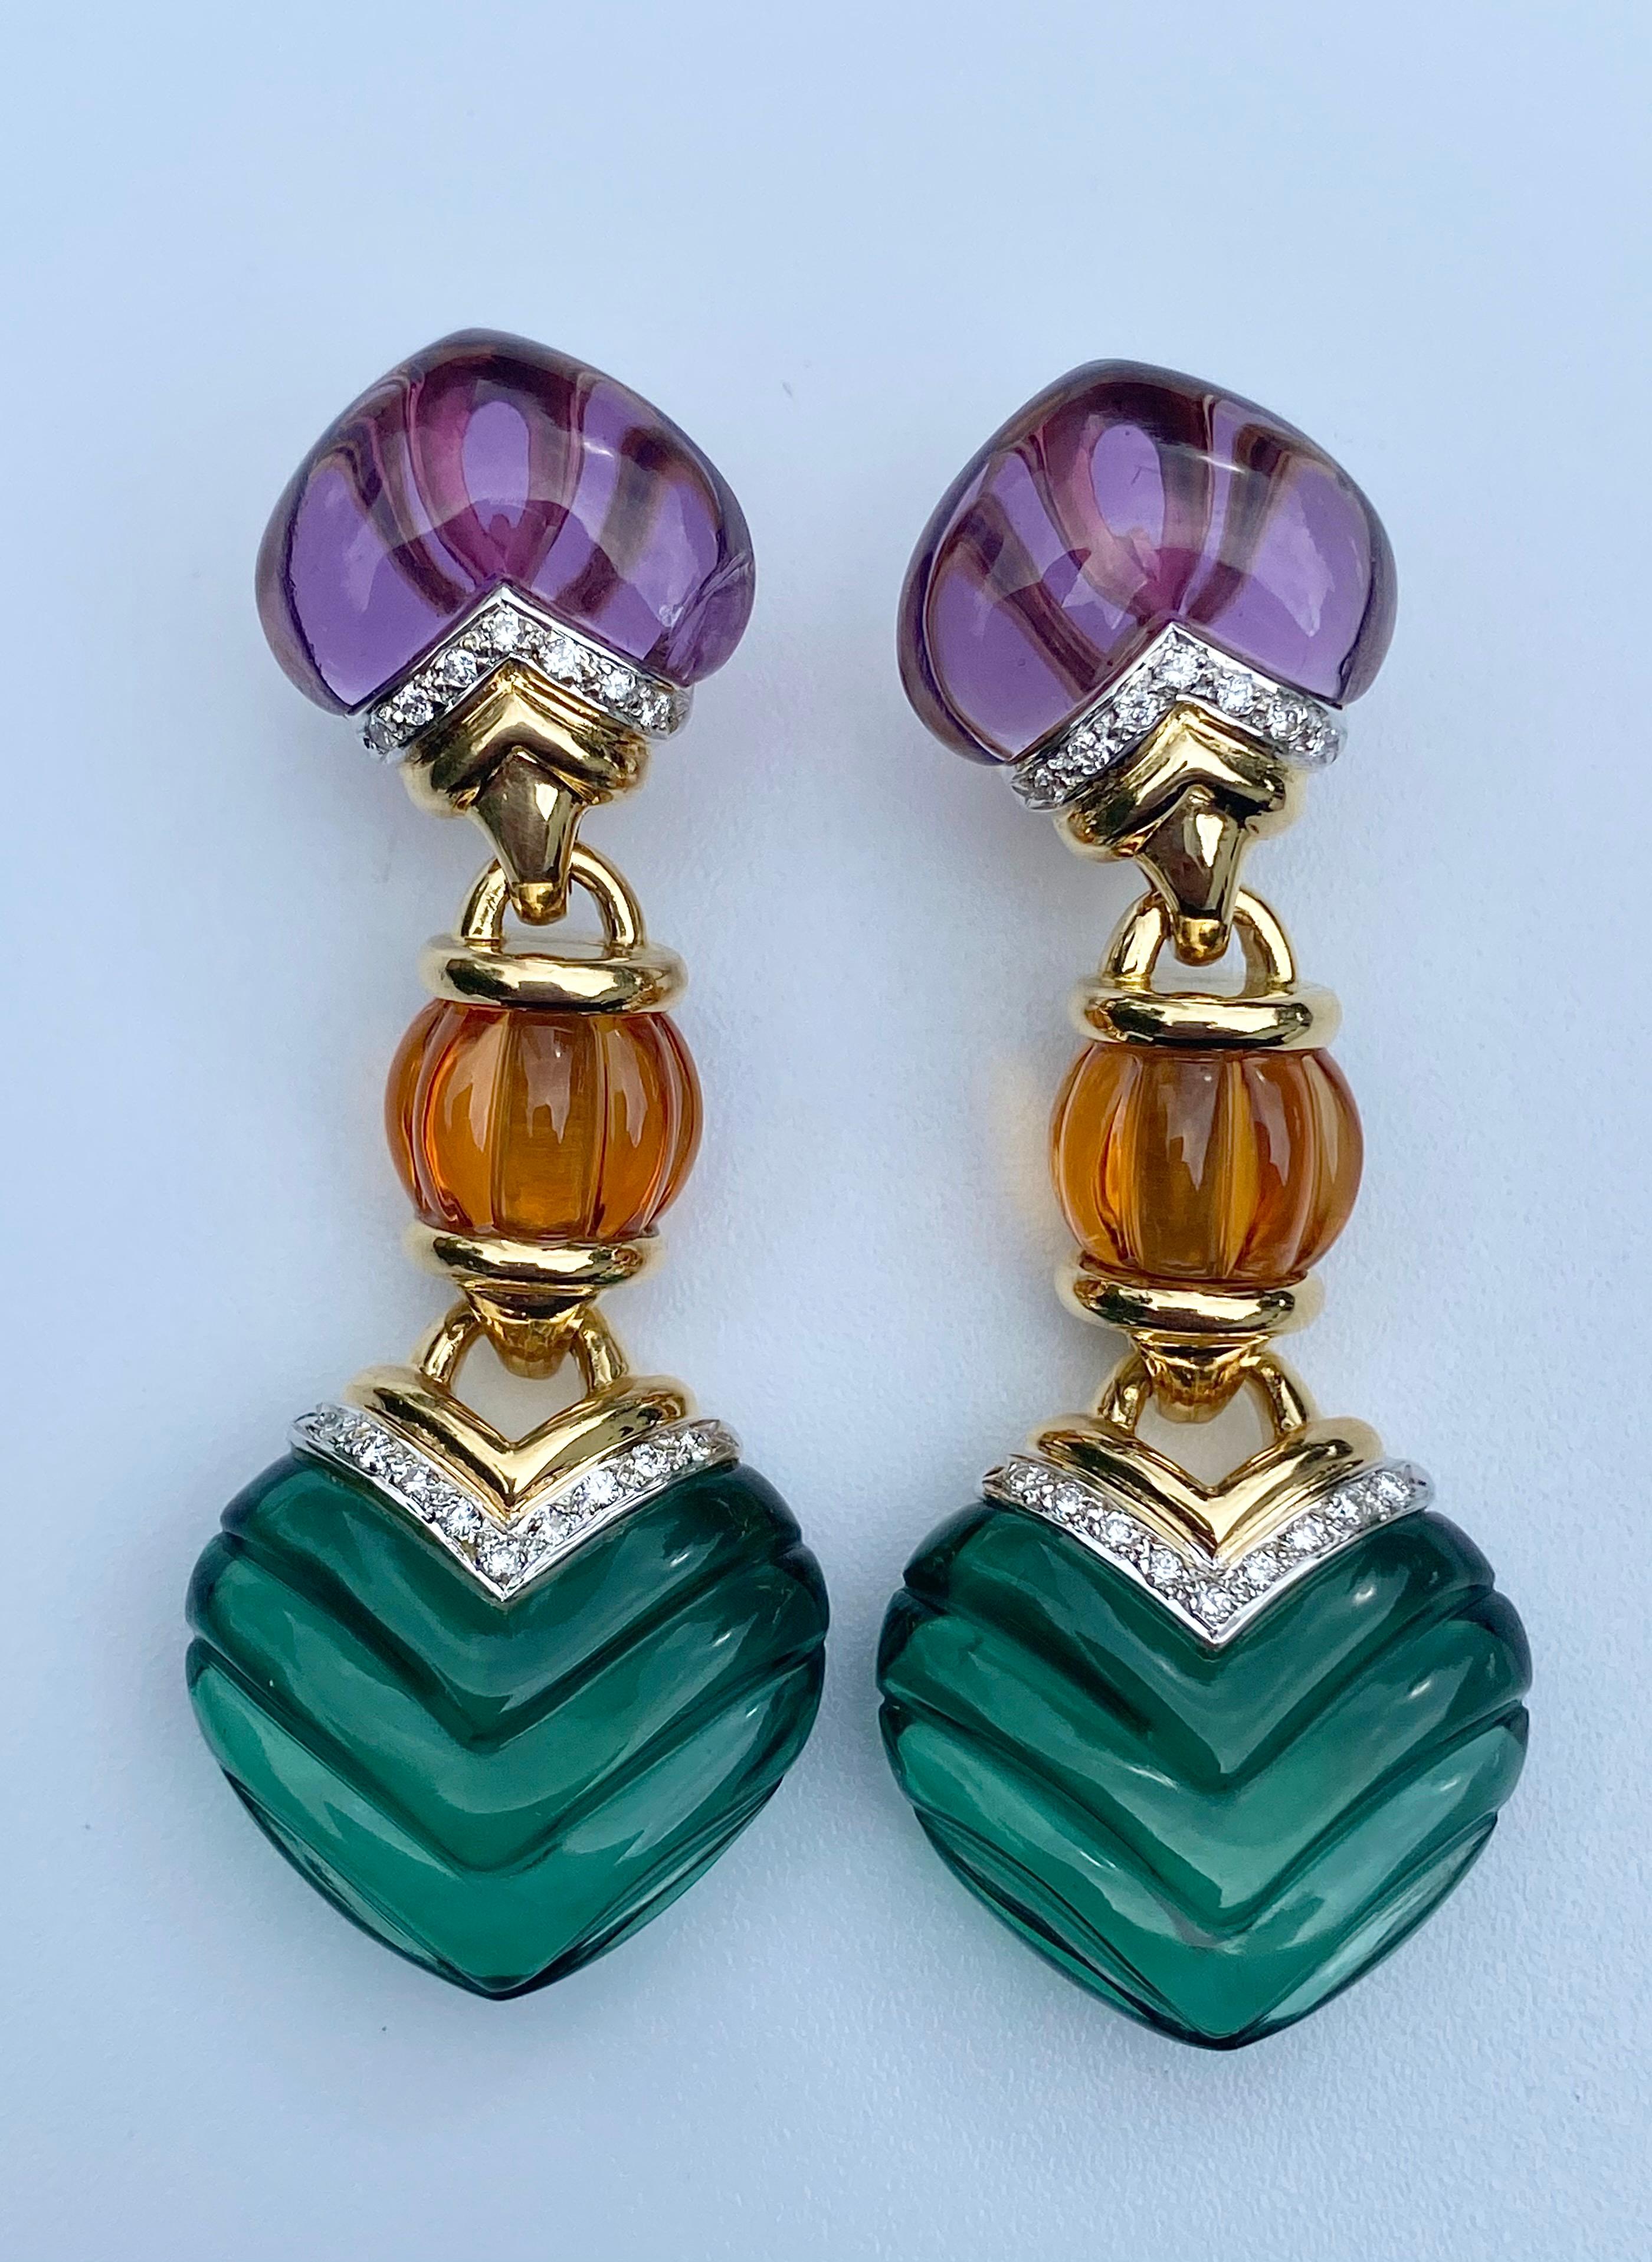 Round Cut Retro-Style Amethyst, Citrine, Green Quartz and Diamond Earrings in 18k Gold For Sale